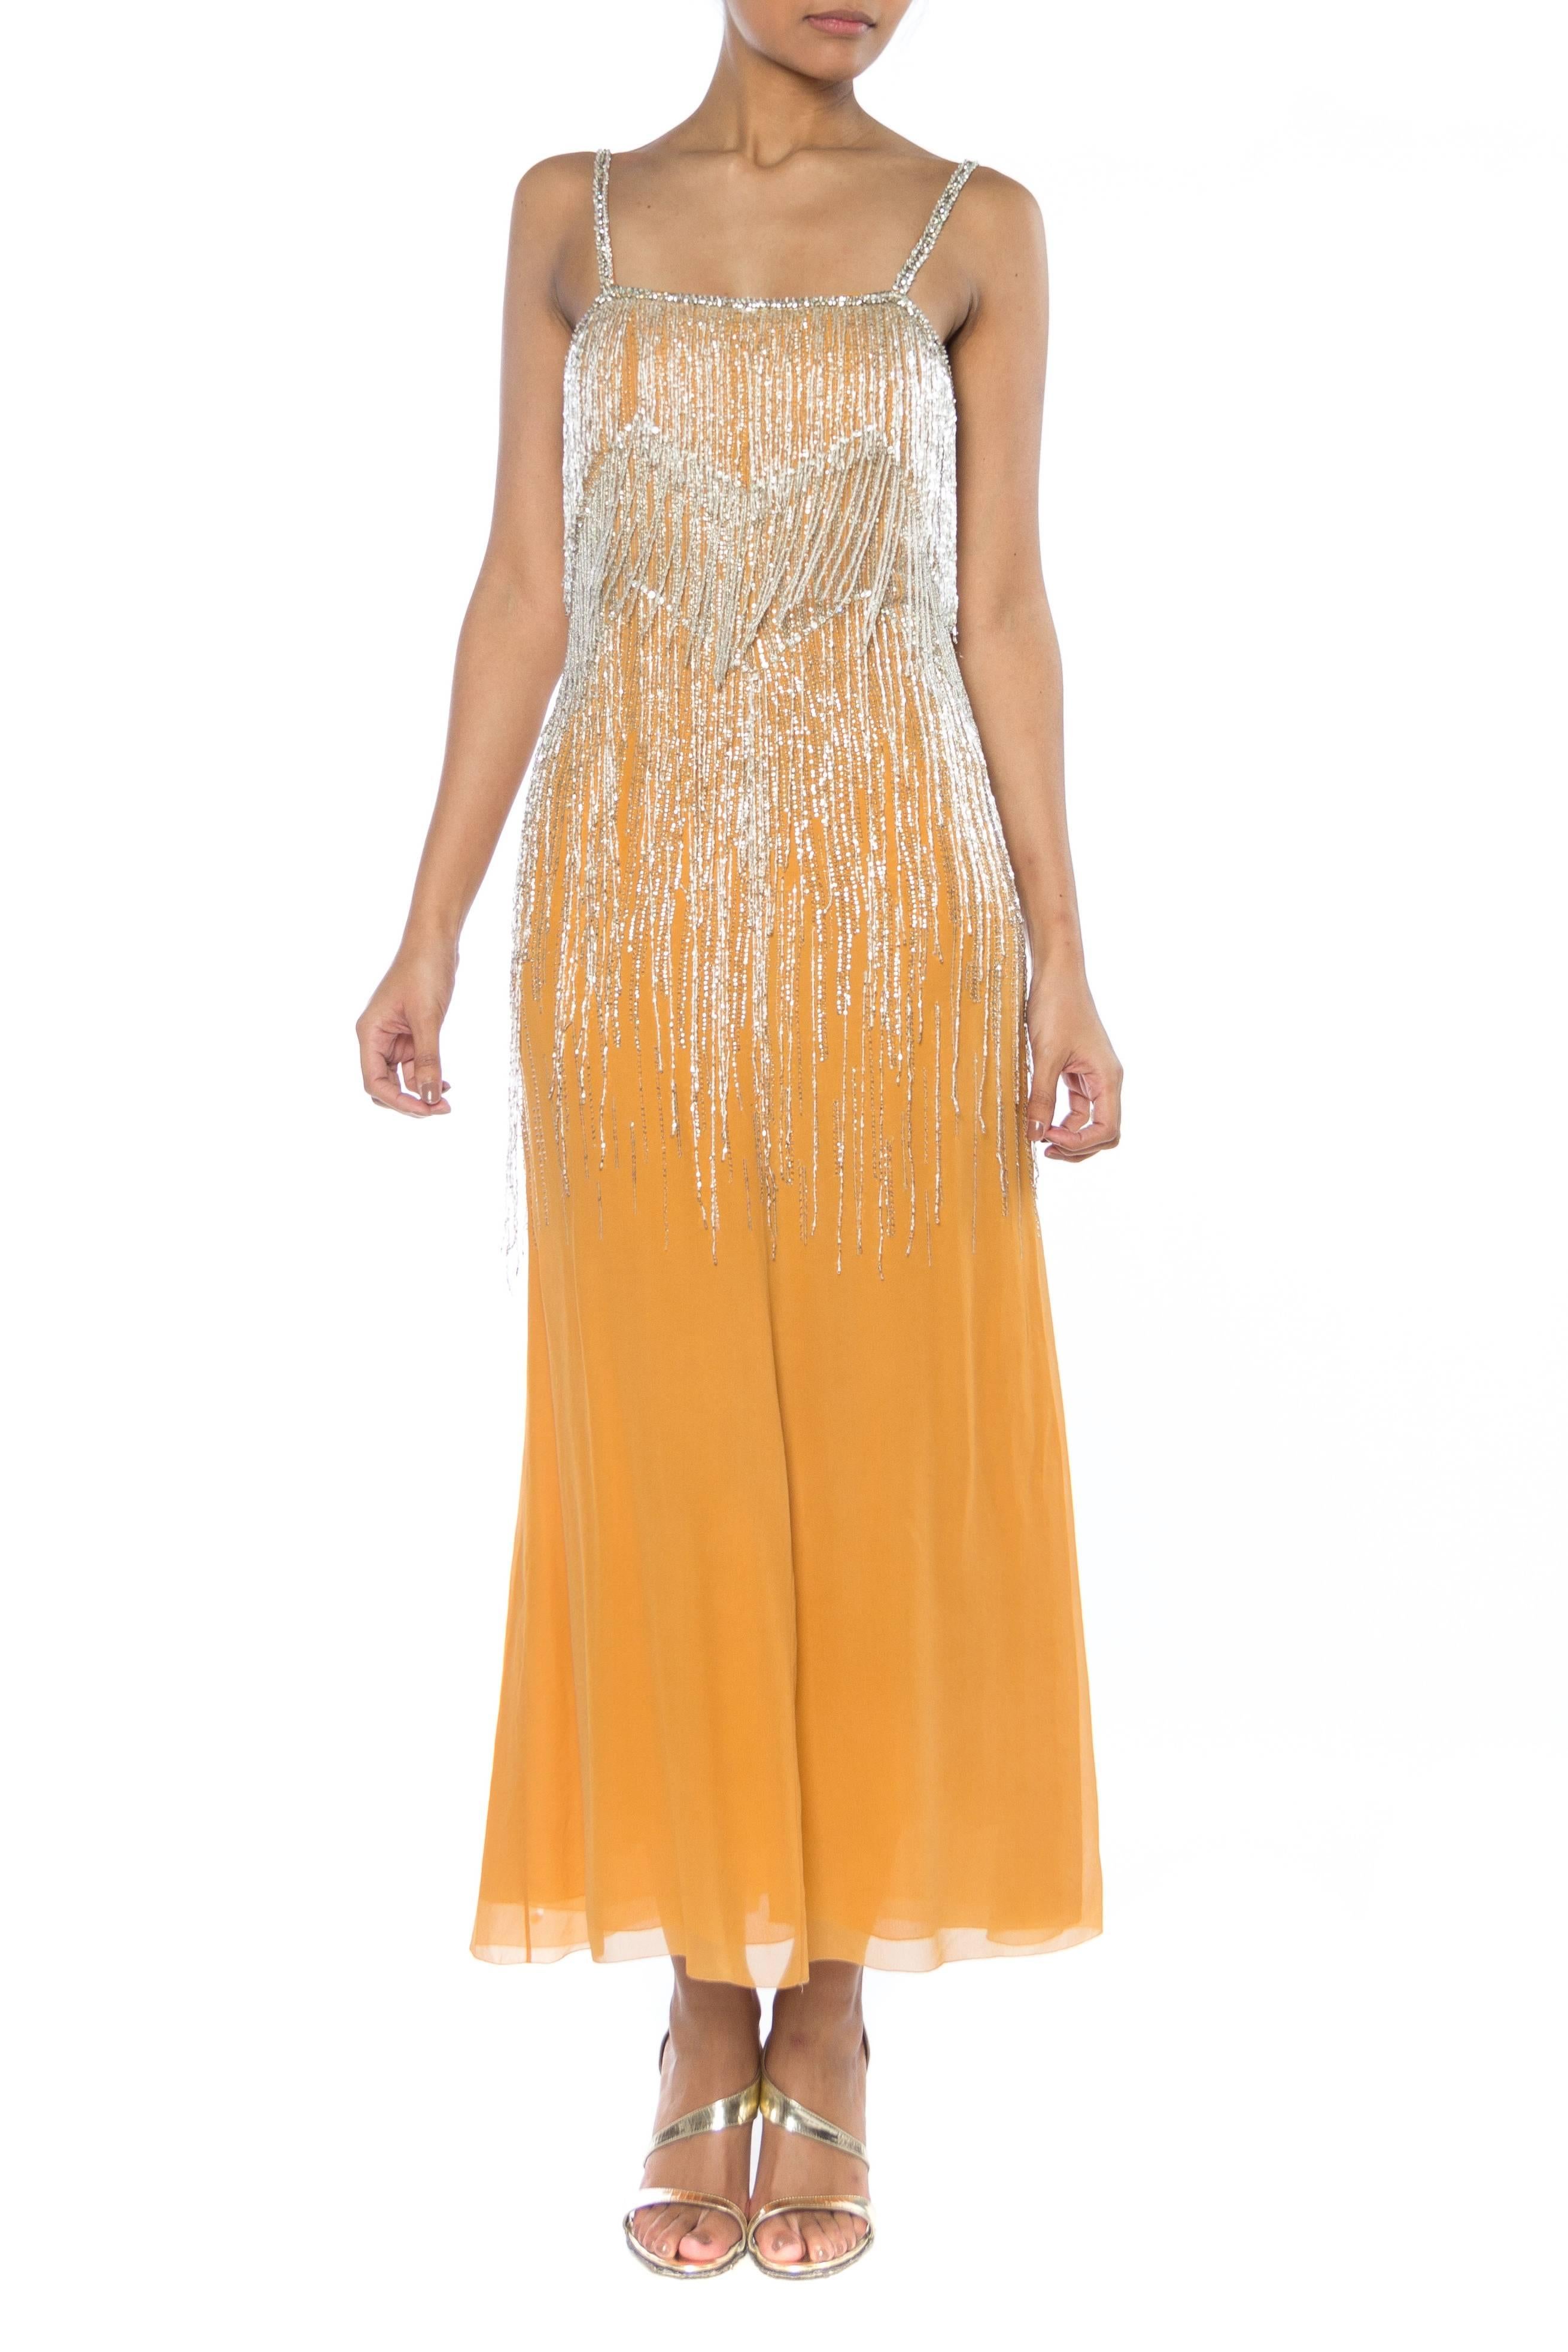 1970S CHRISTIAN DIOR Haute Couture Silk Chiffon Crystal Beaded Fringe Cocktail Dress